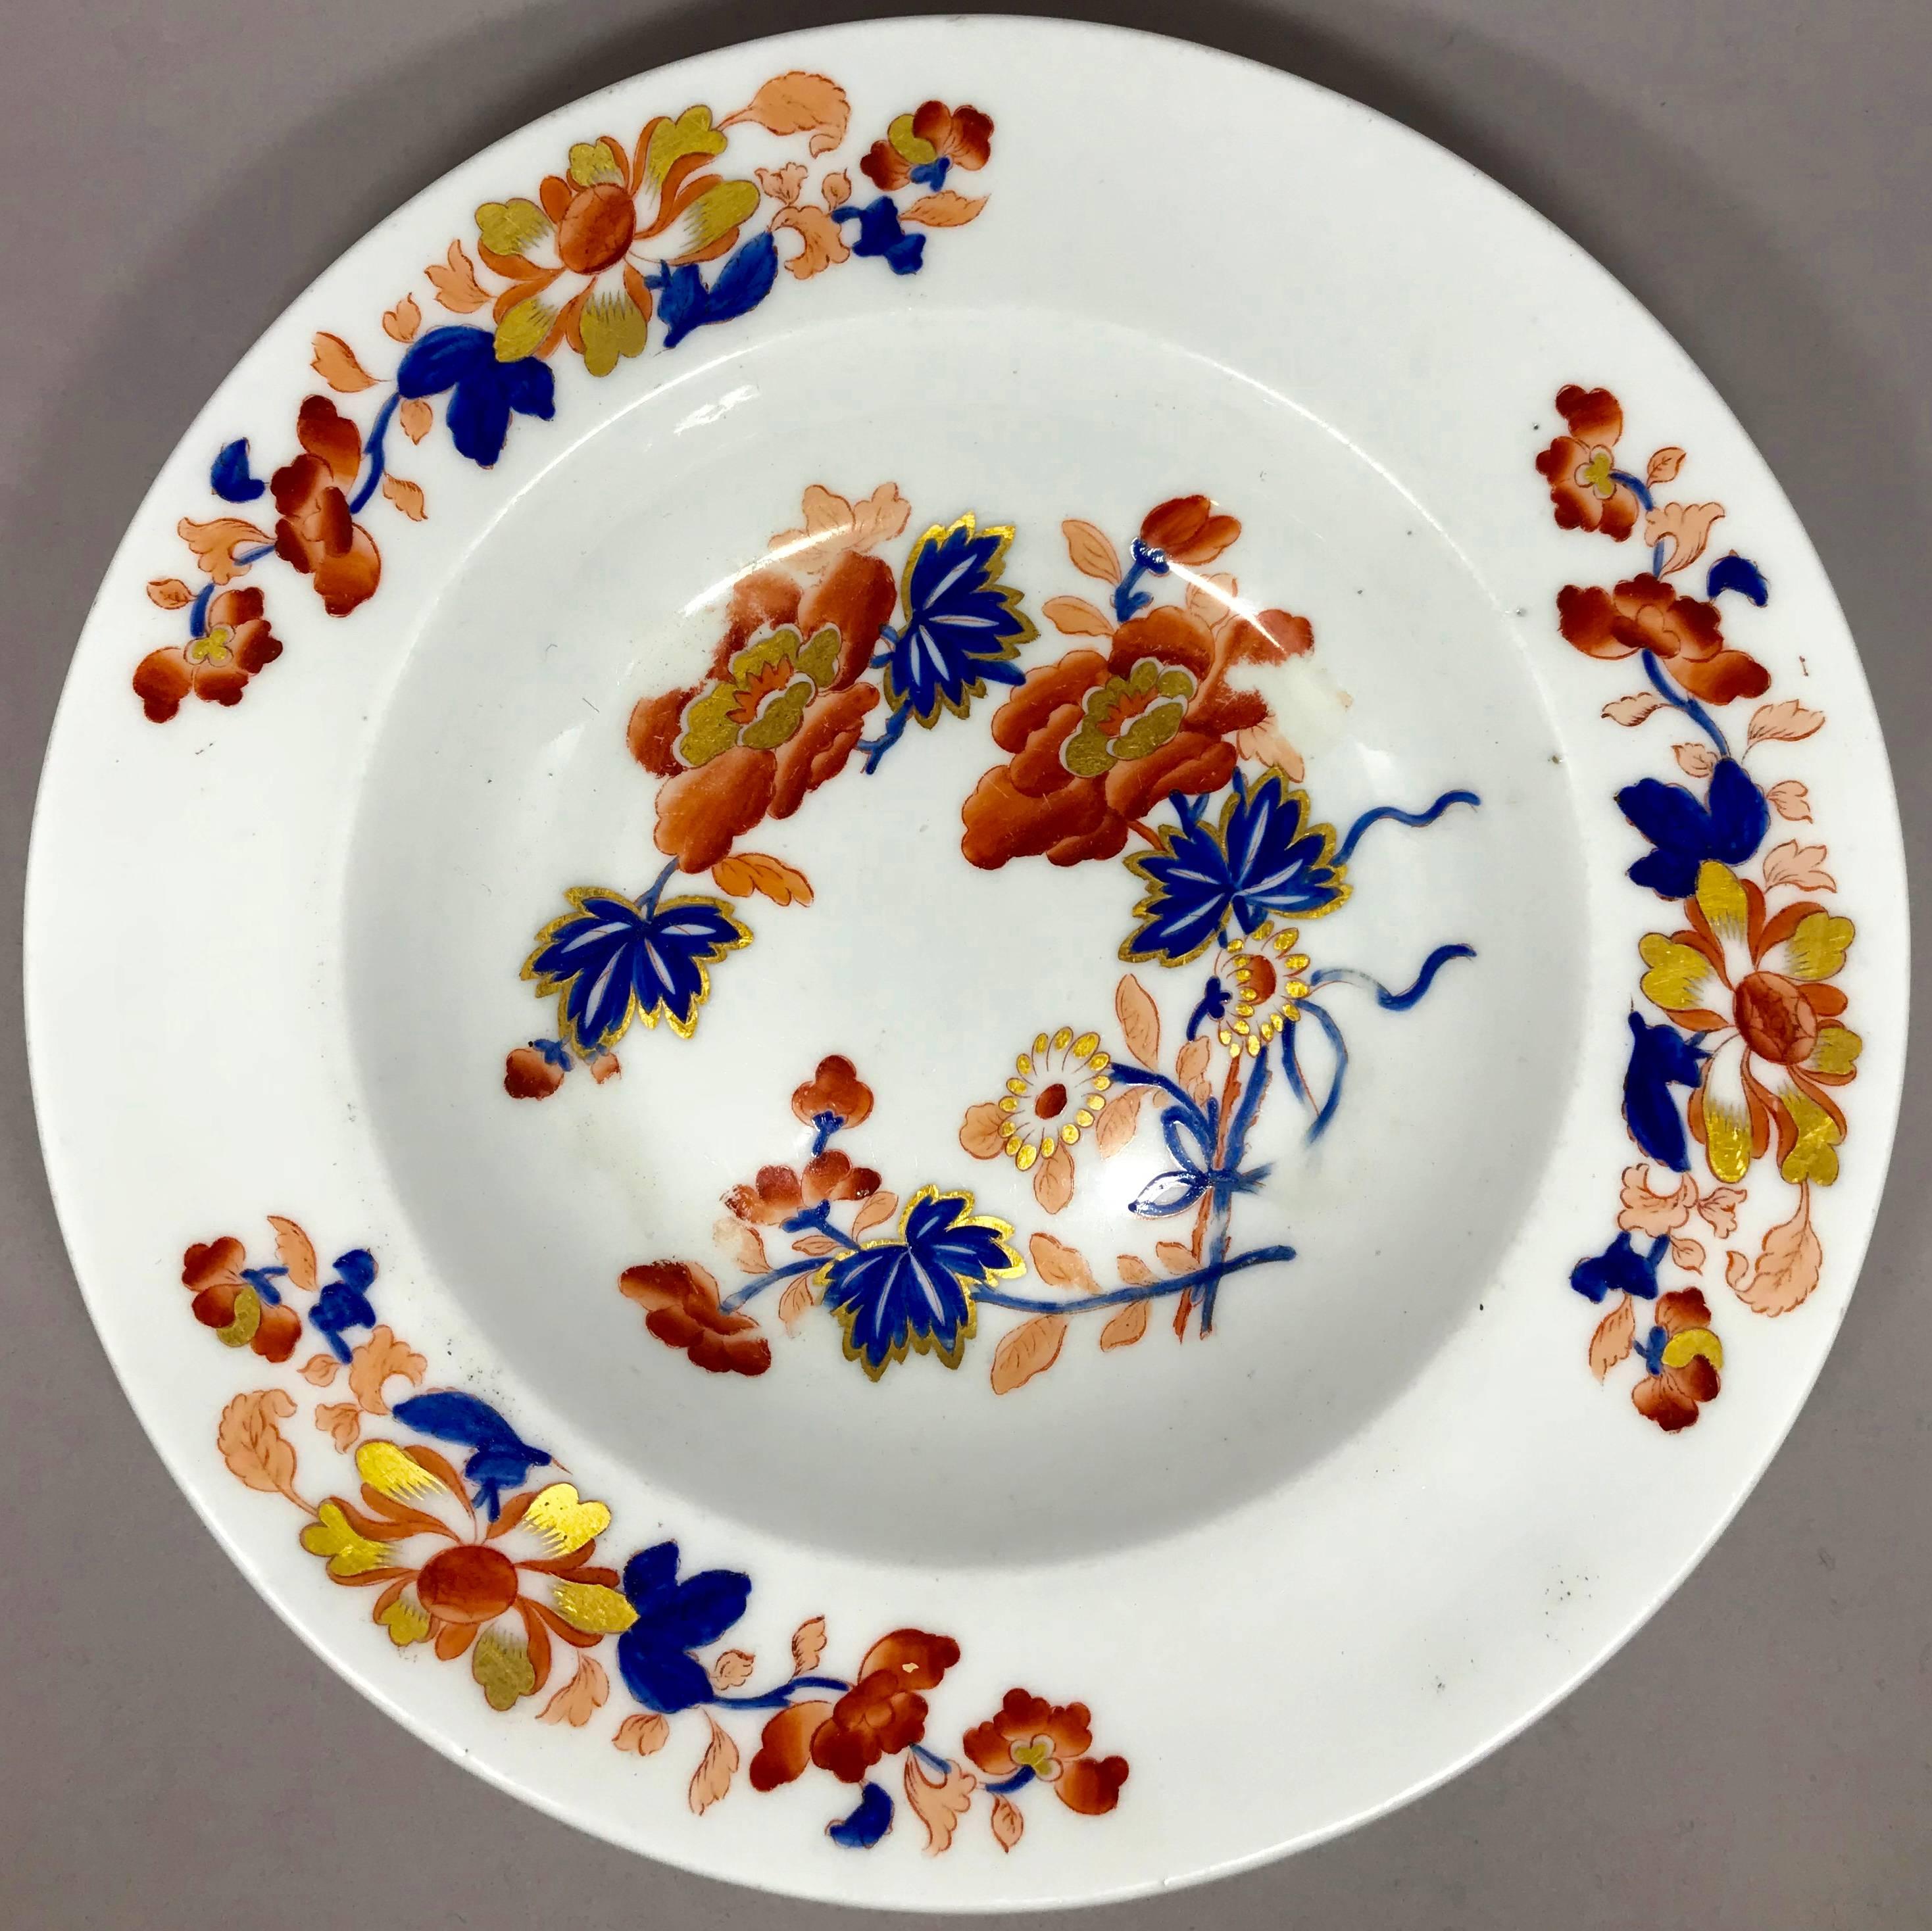 Chamberlain's Worcester Imari Soup  Plate.  Imari style decoration hand-painted soup plate in gilt, cobalt blue, iron red and peach flowers. Hand applied marks for Chamberlain's Regent China Worcester No. 133 New Bond Street, London, England, circa